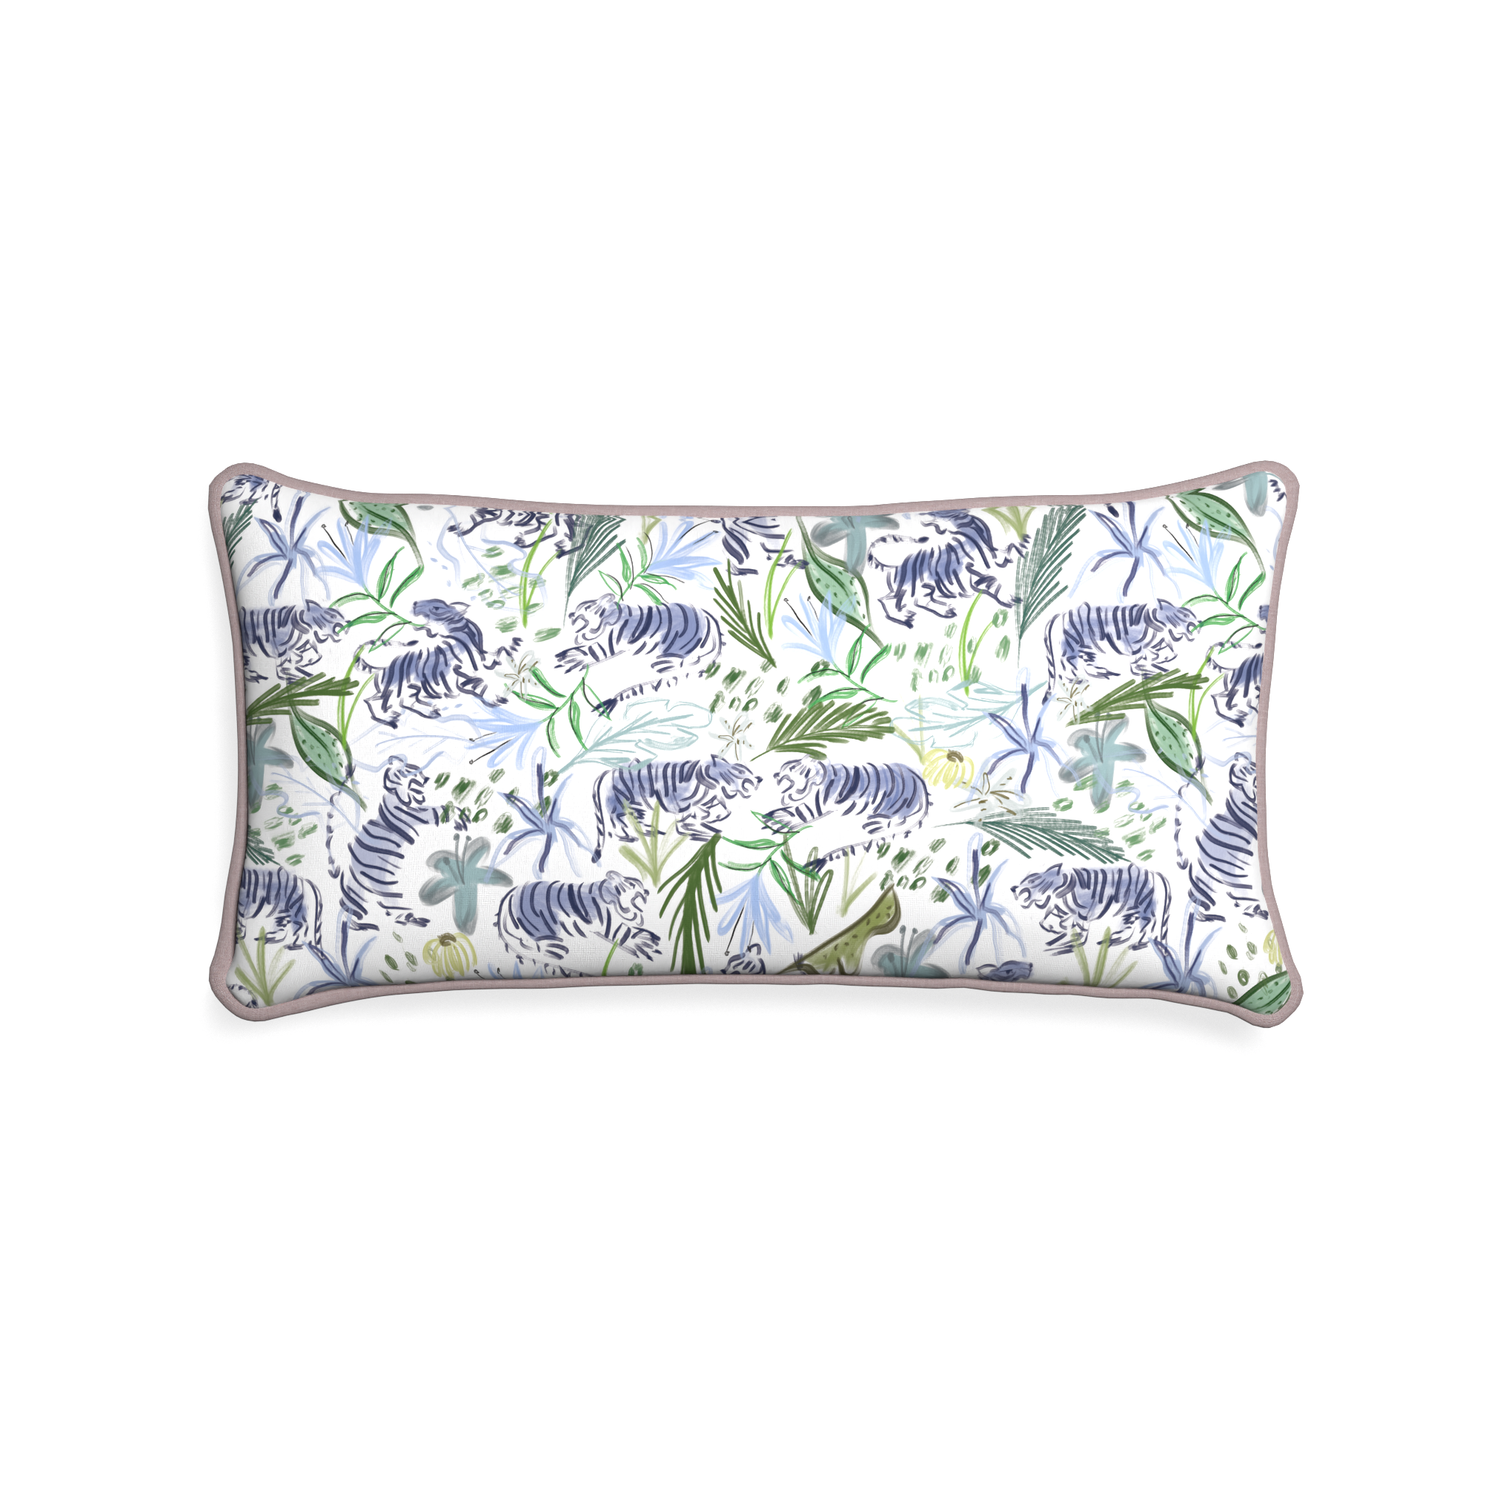 Midi-lumbar frida green custom green tigerpillow with orchid piping on white background